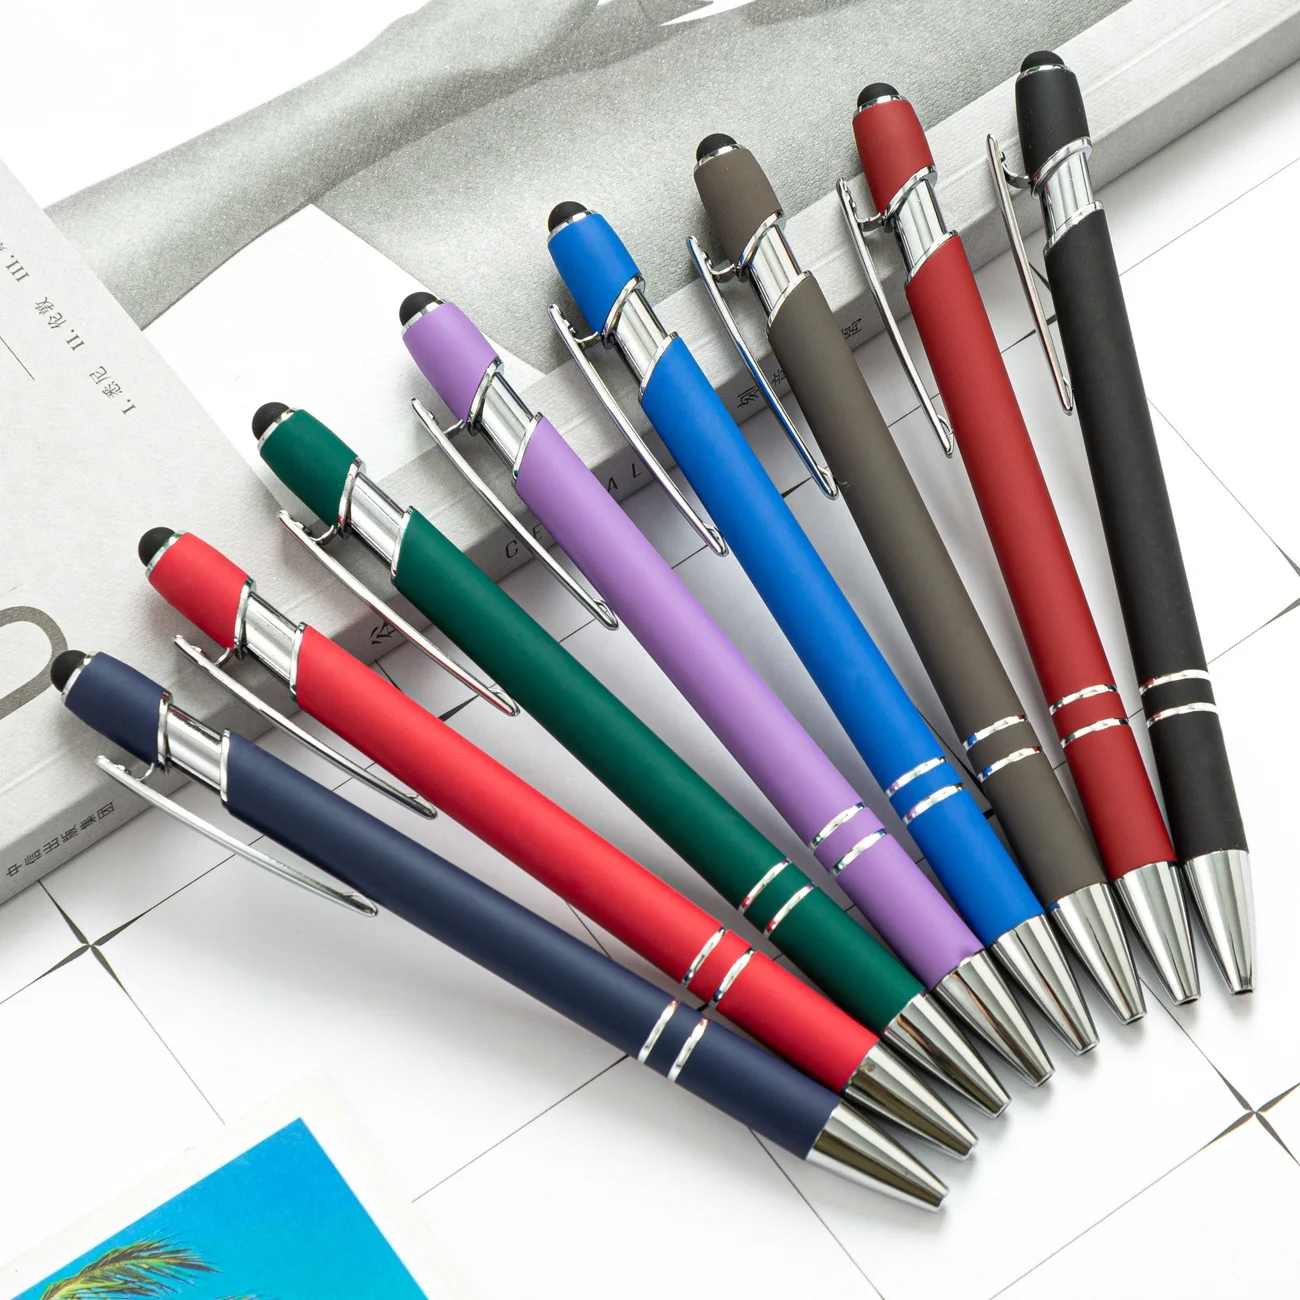 Fashion Promotional 2 In 1 Stylus Ballpoint Pen Soft Touch Capacitive Screen Touch Pen Custom Logo Metal Ballpoint Pens